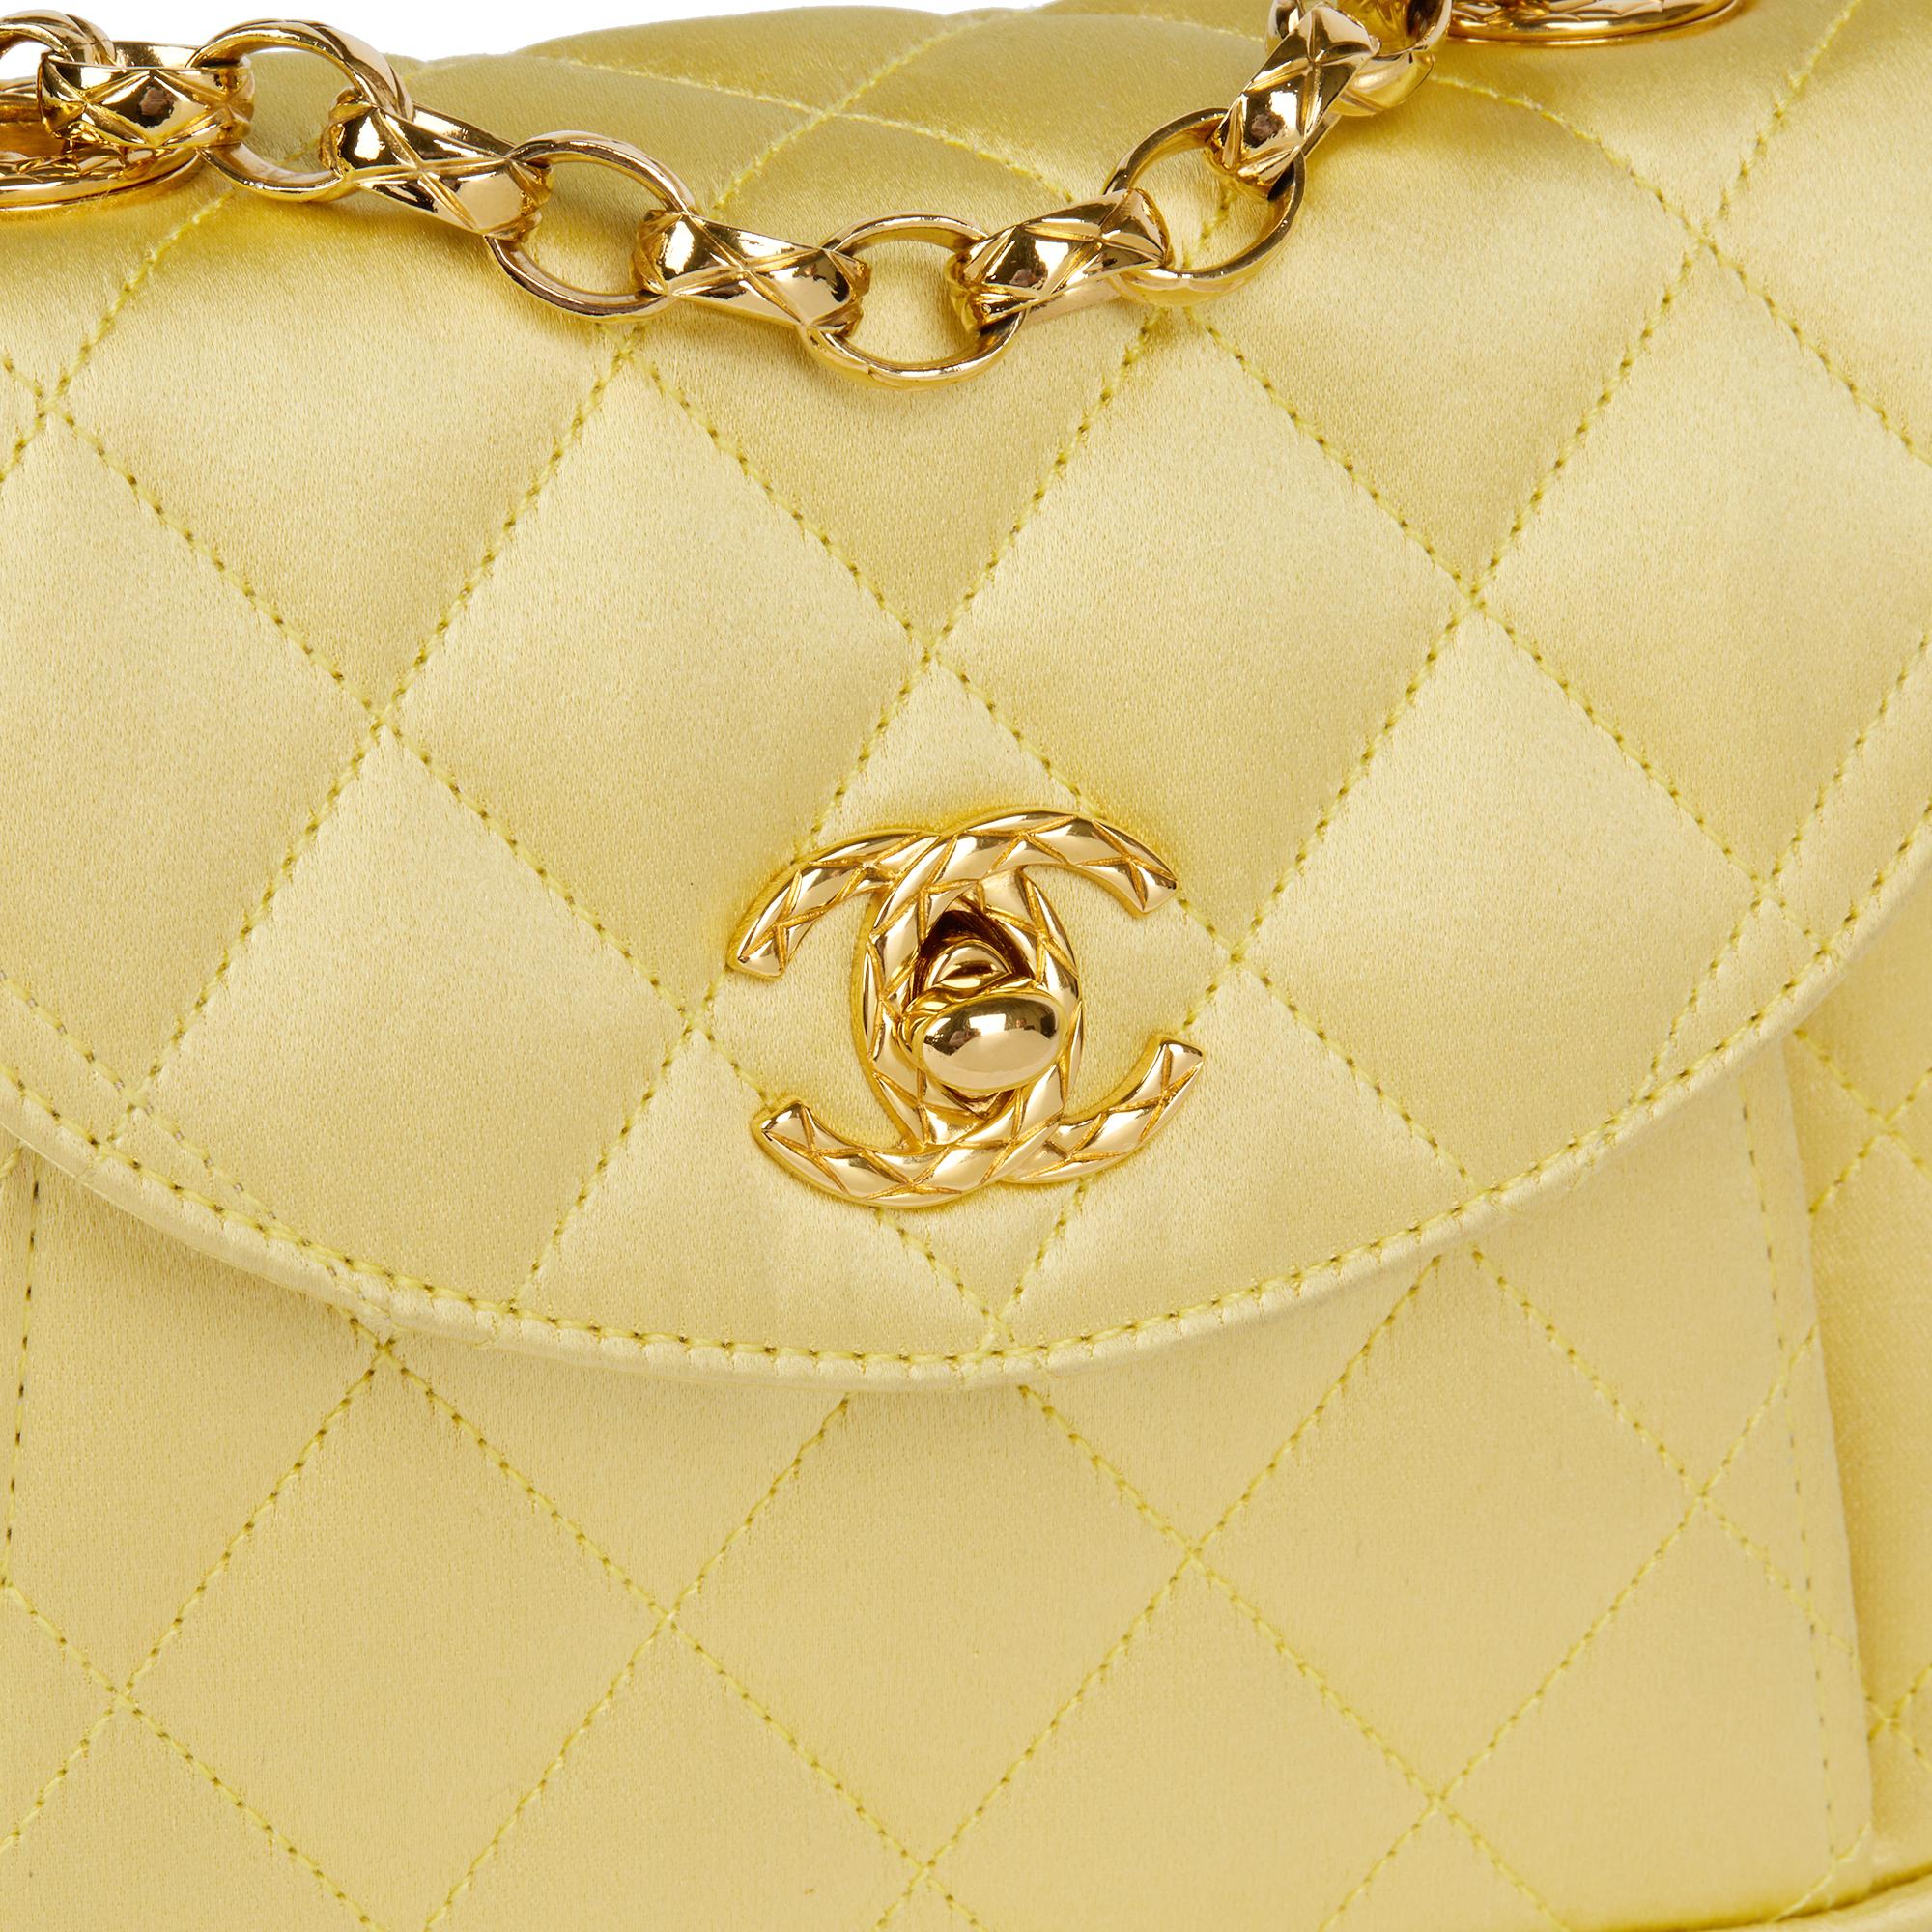 CHANEL Yellow Quilted Satin Vintage Mini Flap Bag For Sale 1